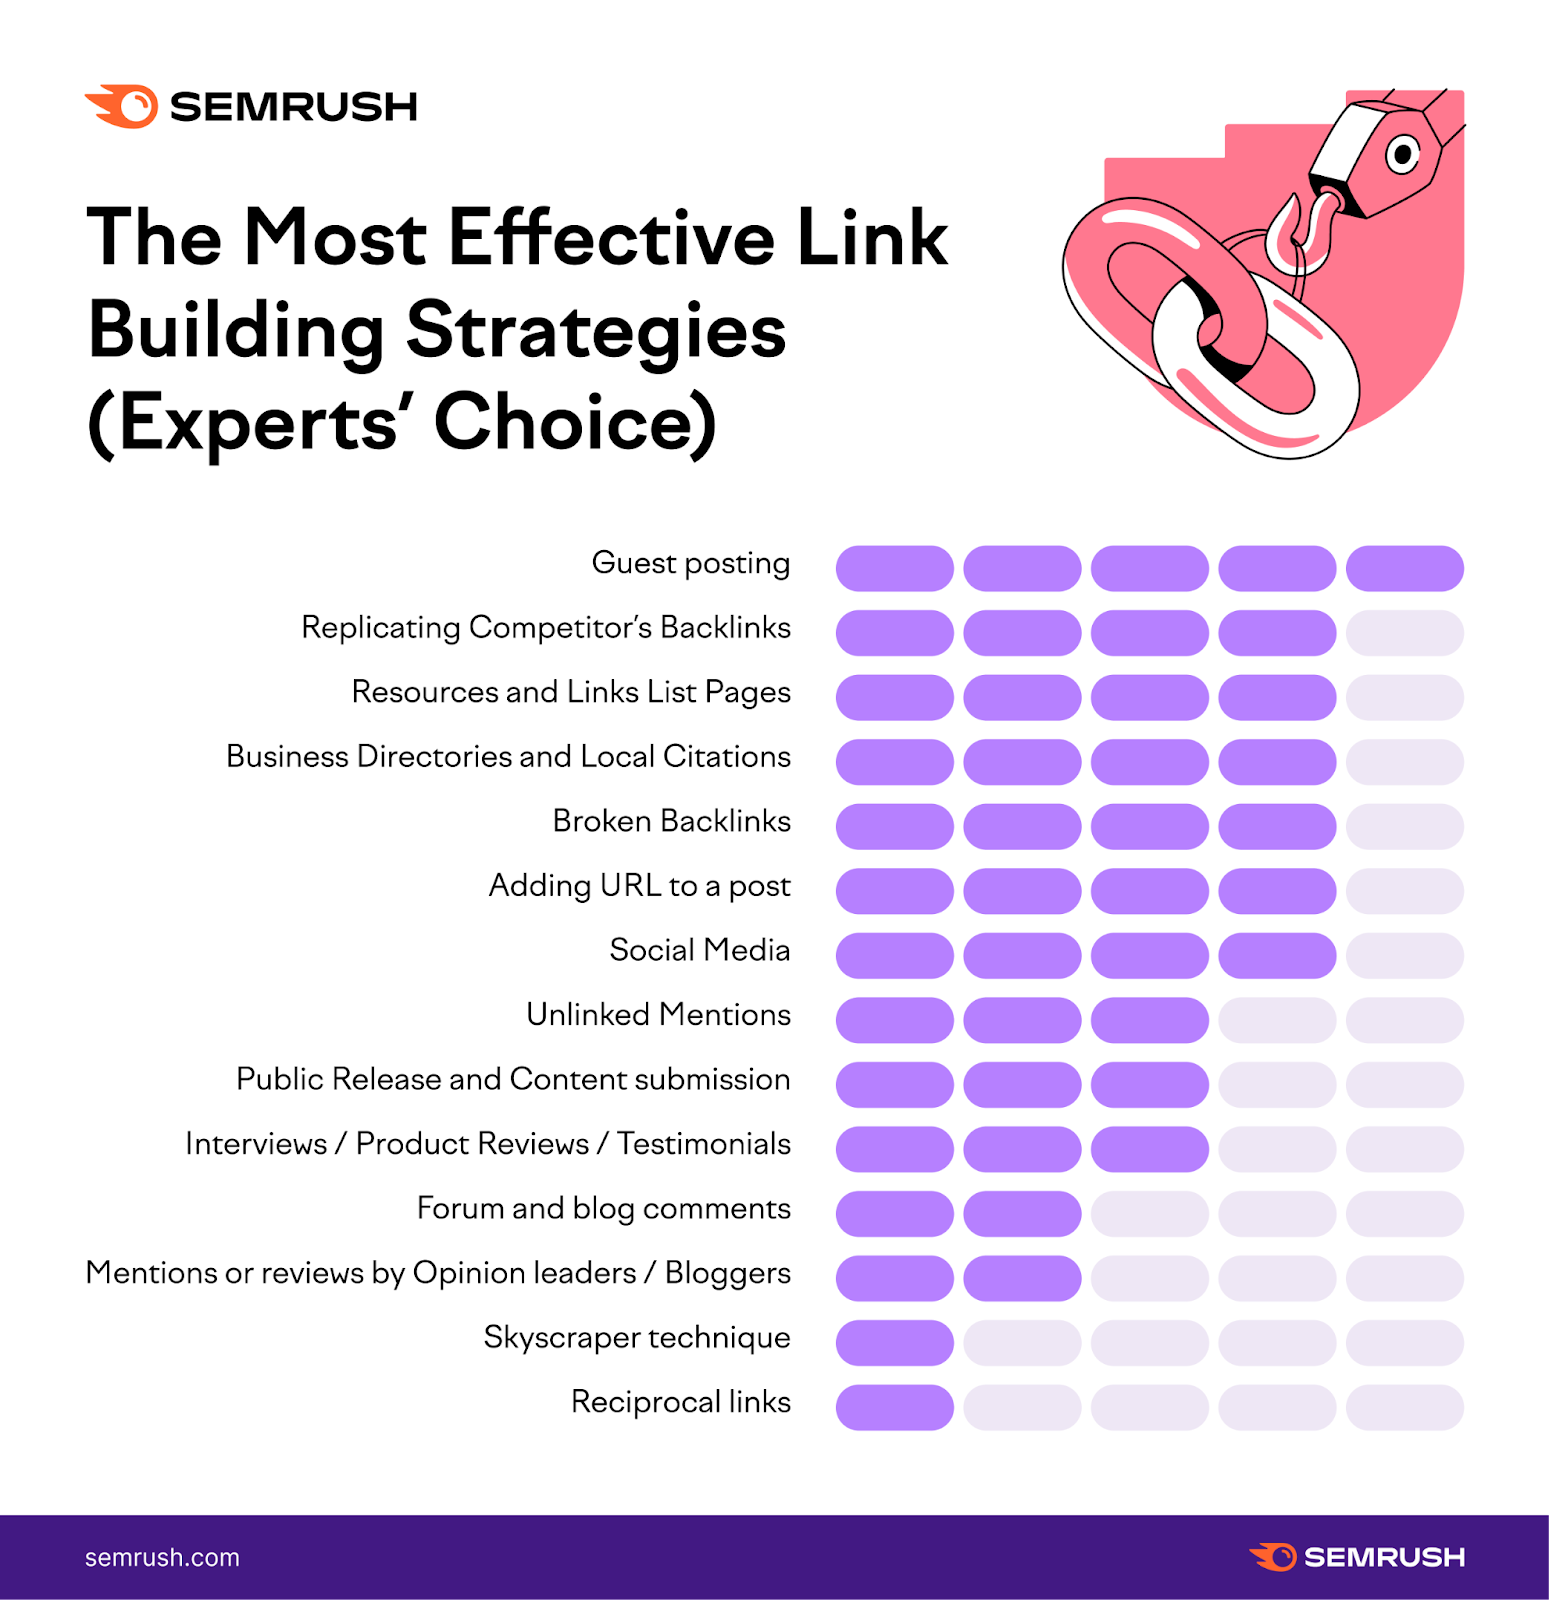 An infographic by Semrush listing the most effective link building strategies (expert's choice)